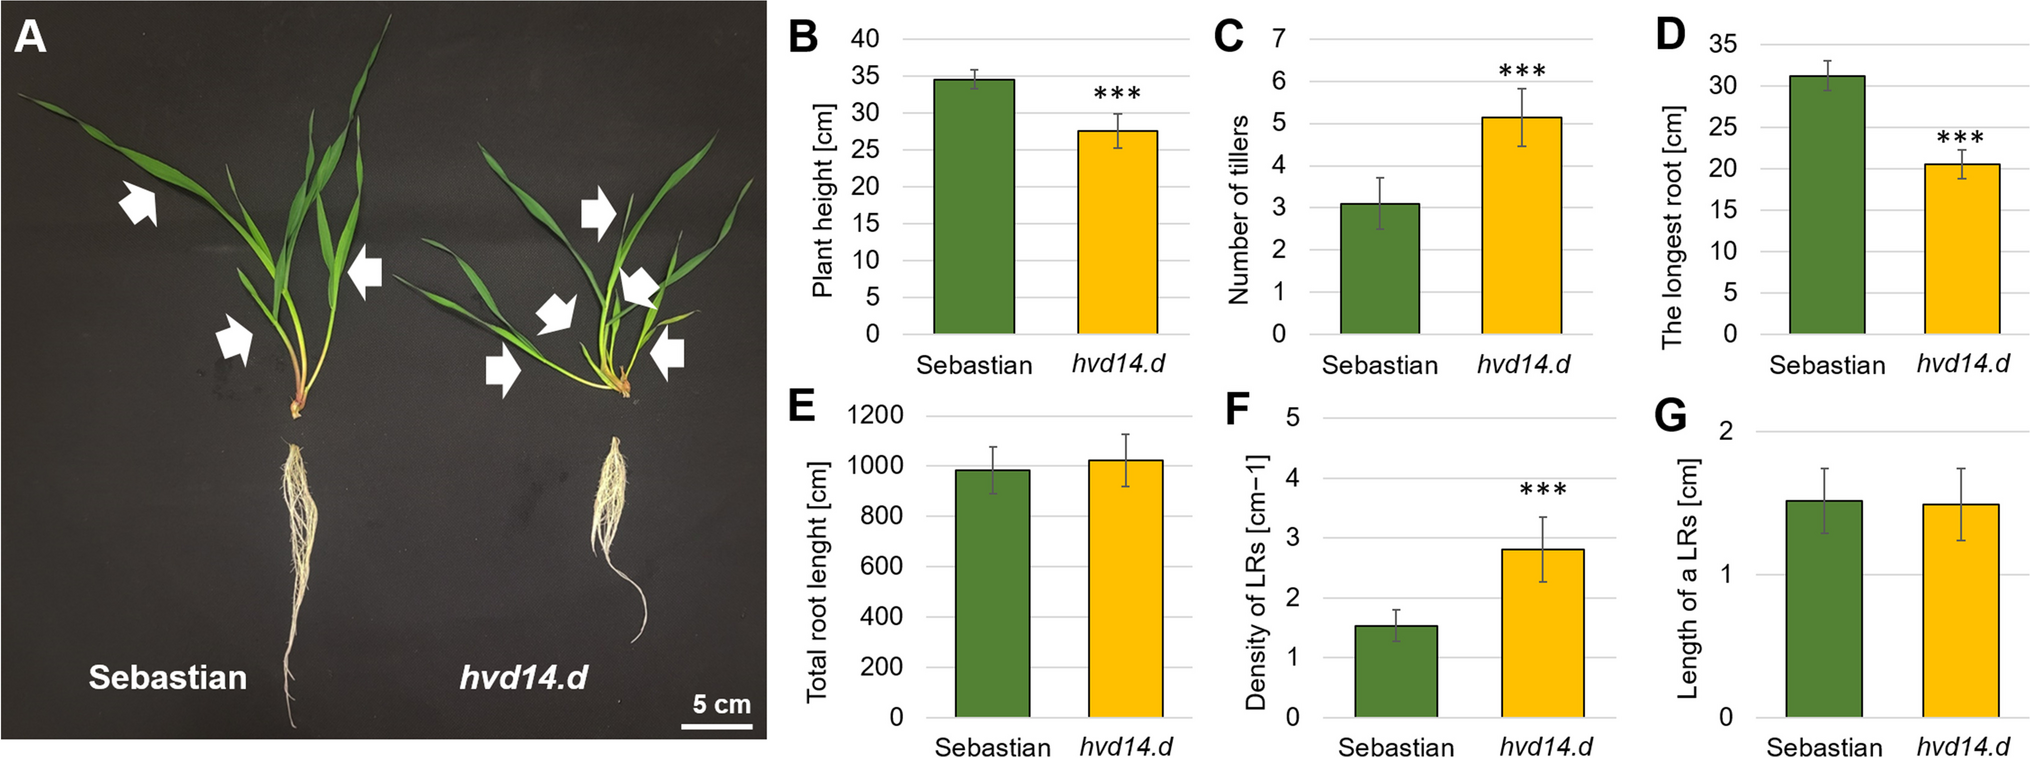 Strigolactone insensitivity affects differential shoot and root transcriptome in barley